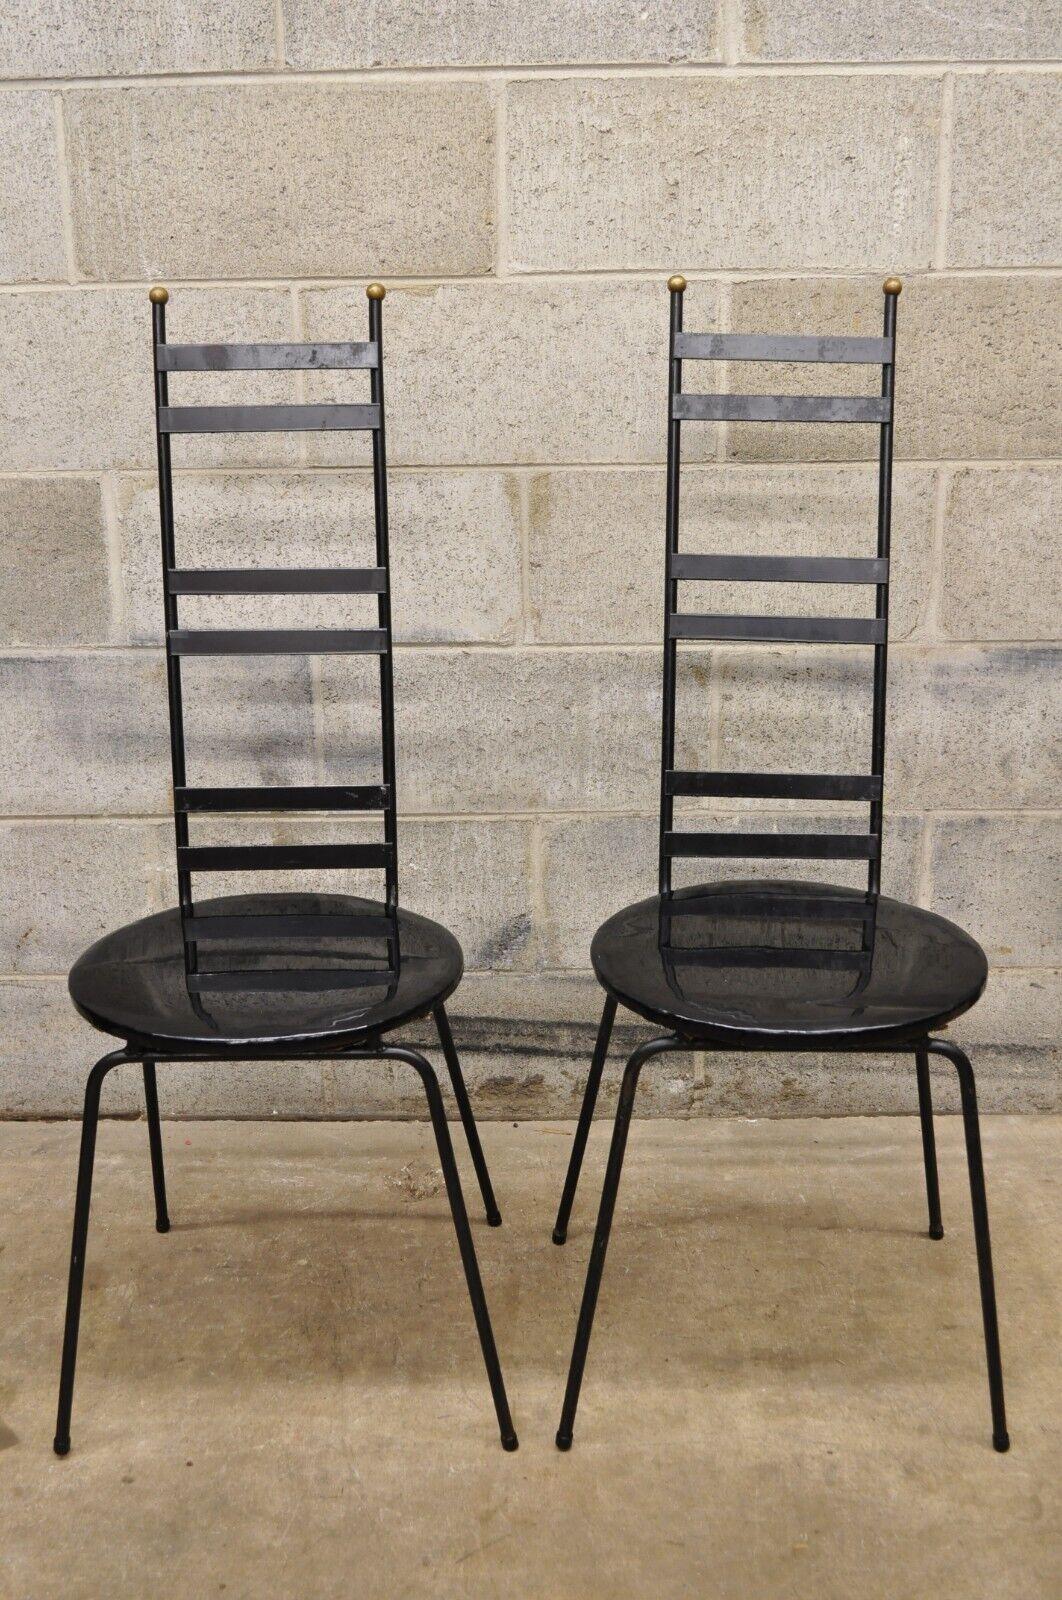 Vintage Arthur Umanoff Attributed Wrought Iron Ladder Back Chairs - a Pair. Item features round vinyl seats, brass ball form finials, narrow iron ladder backs, wrought iron construction, clean modernist lines, great style and form, attributed to